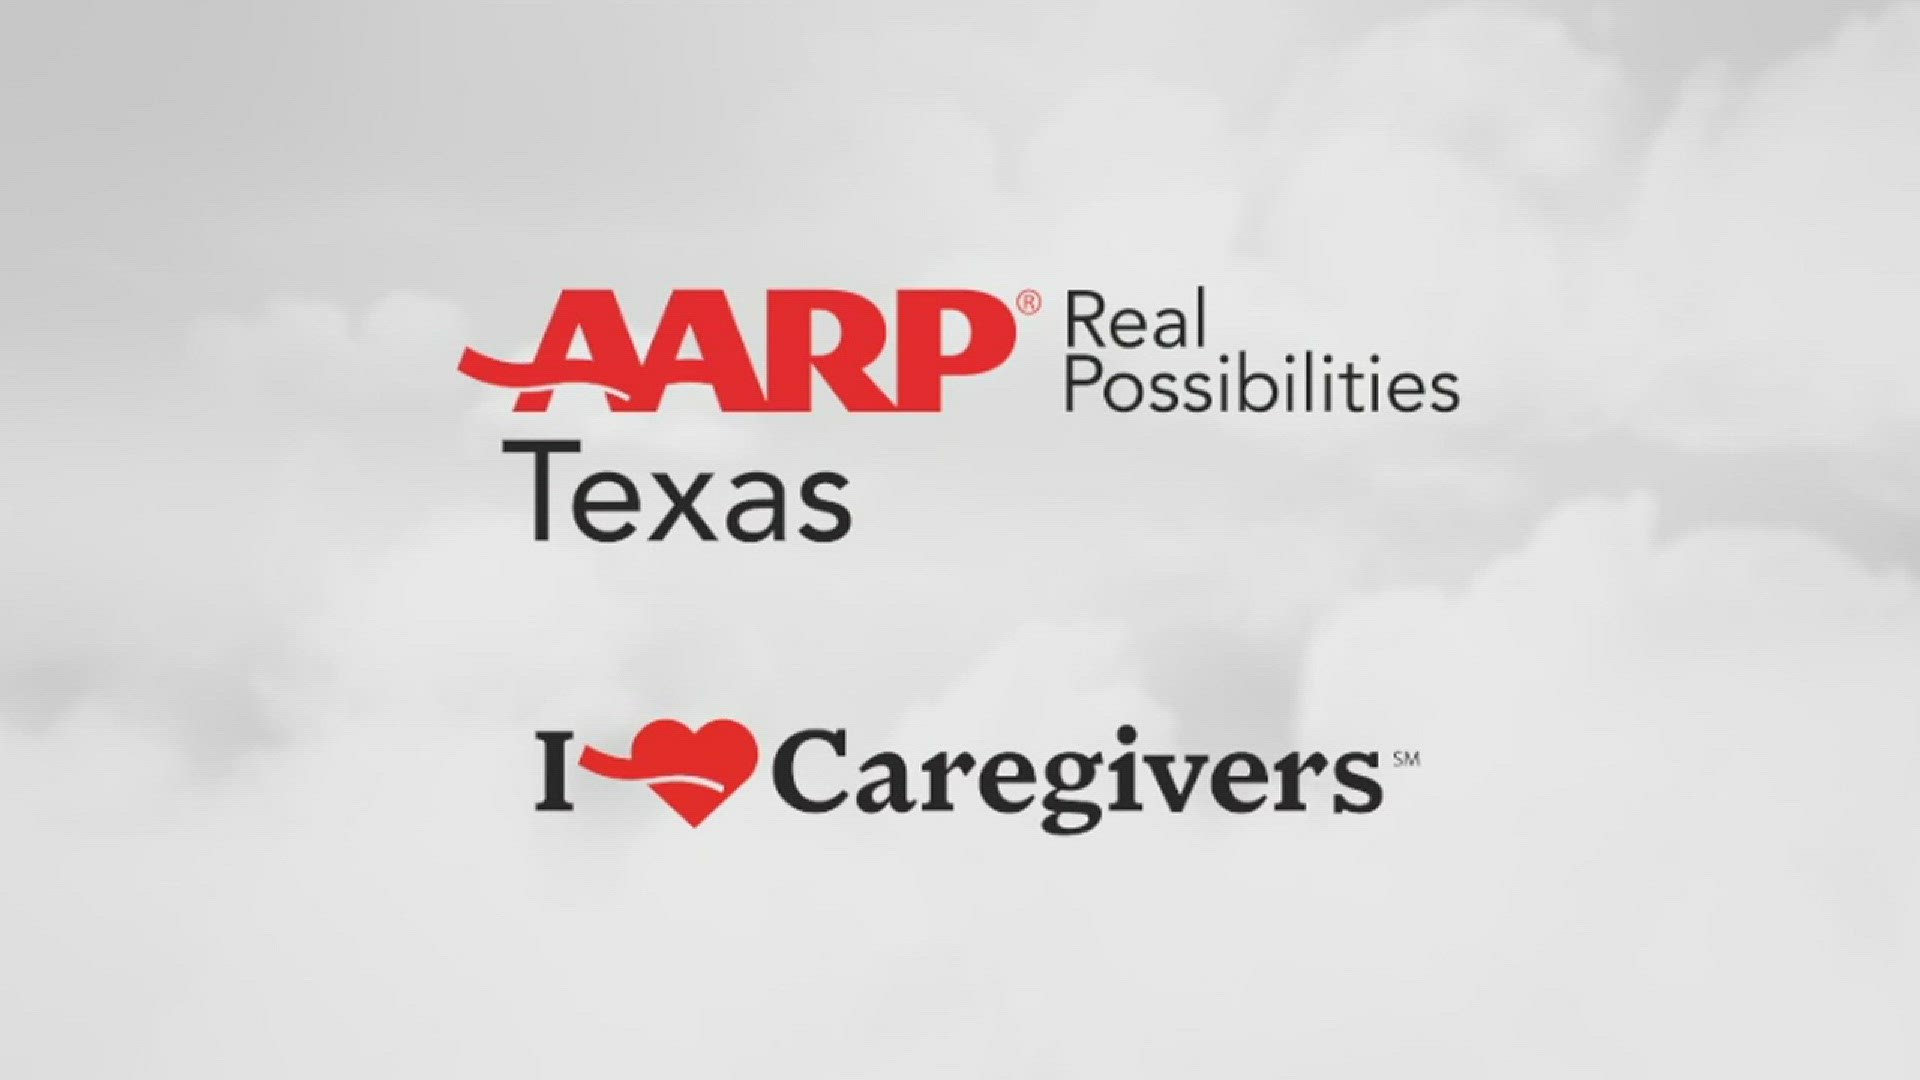 Over three million Texans care for older parents, spouses and loved ones. Share your story.